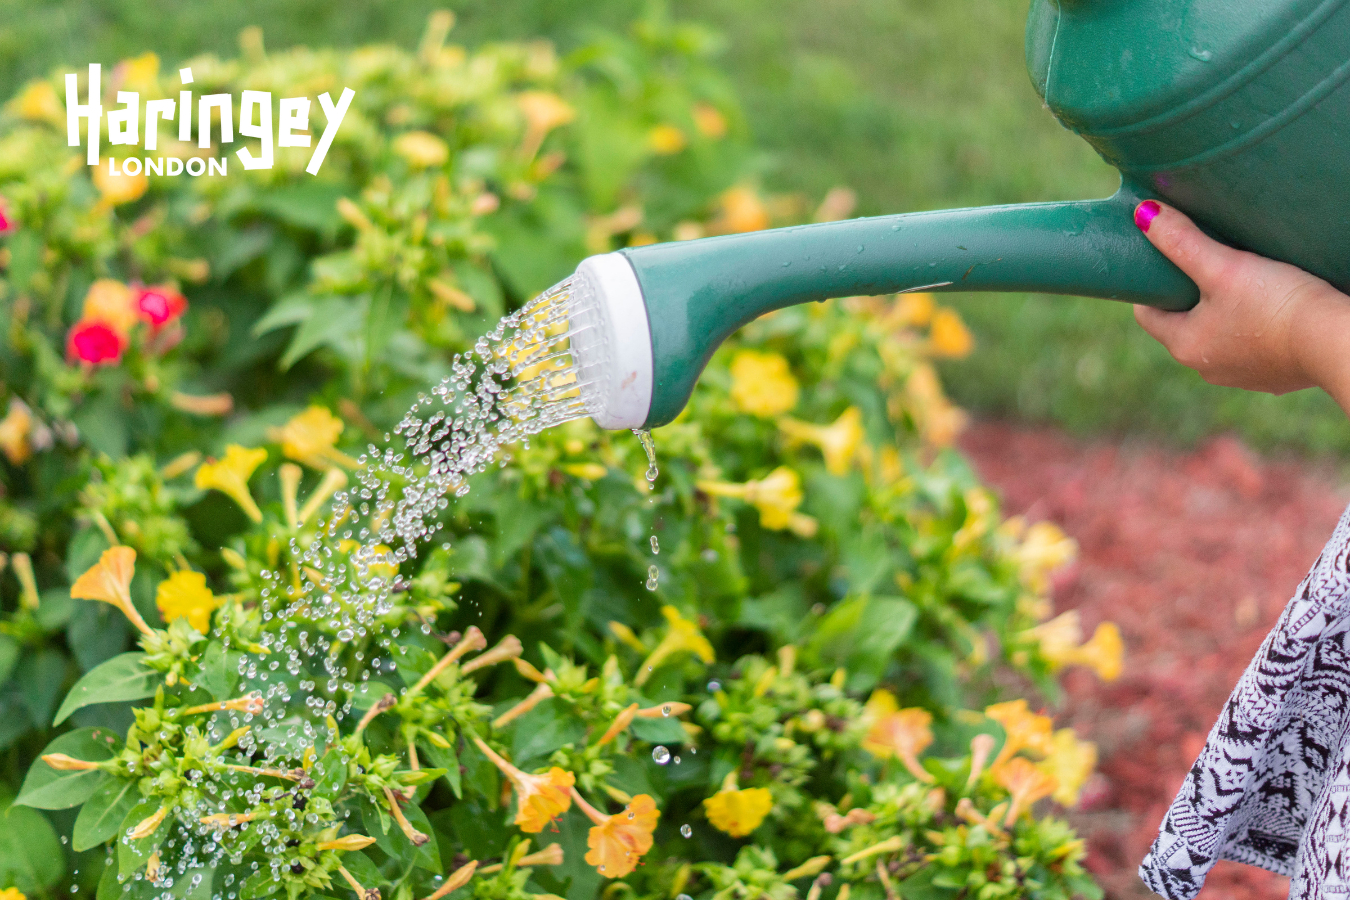 Image of woman's arm holding a watering can to water flowers in her garden.